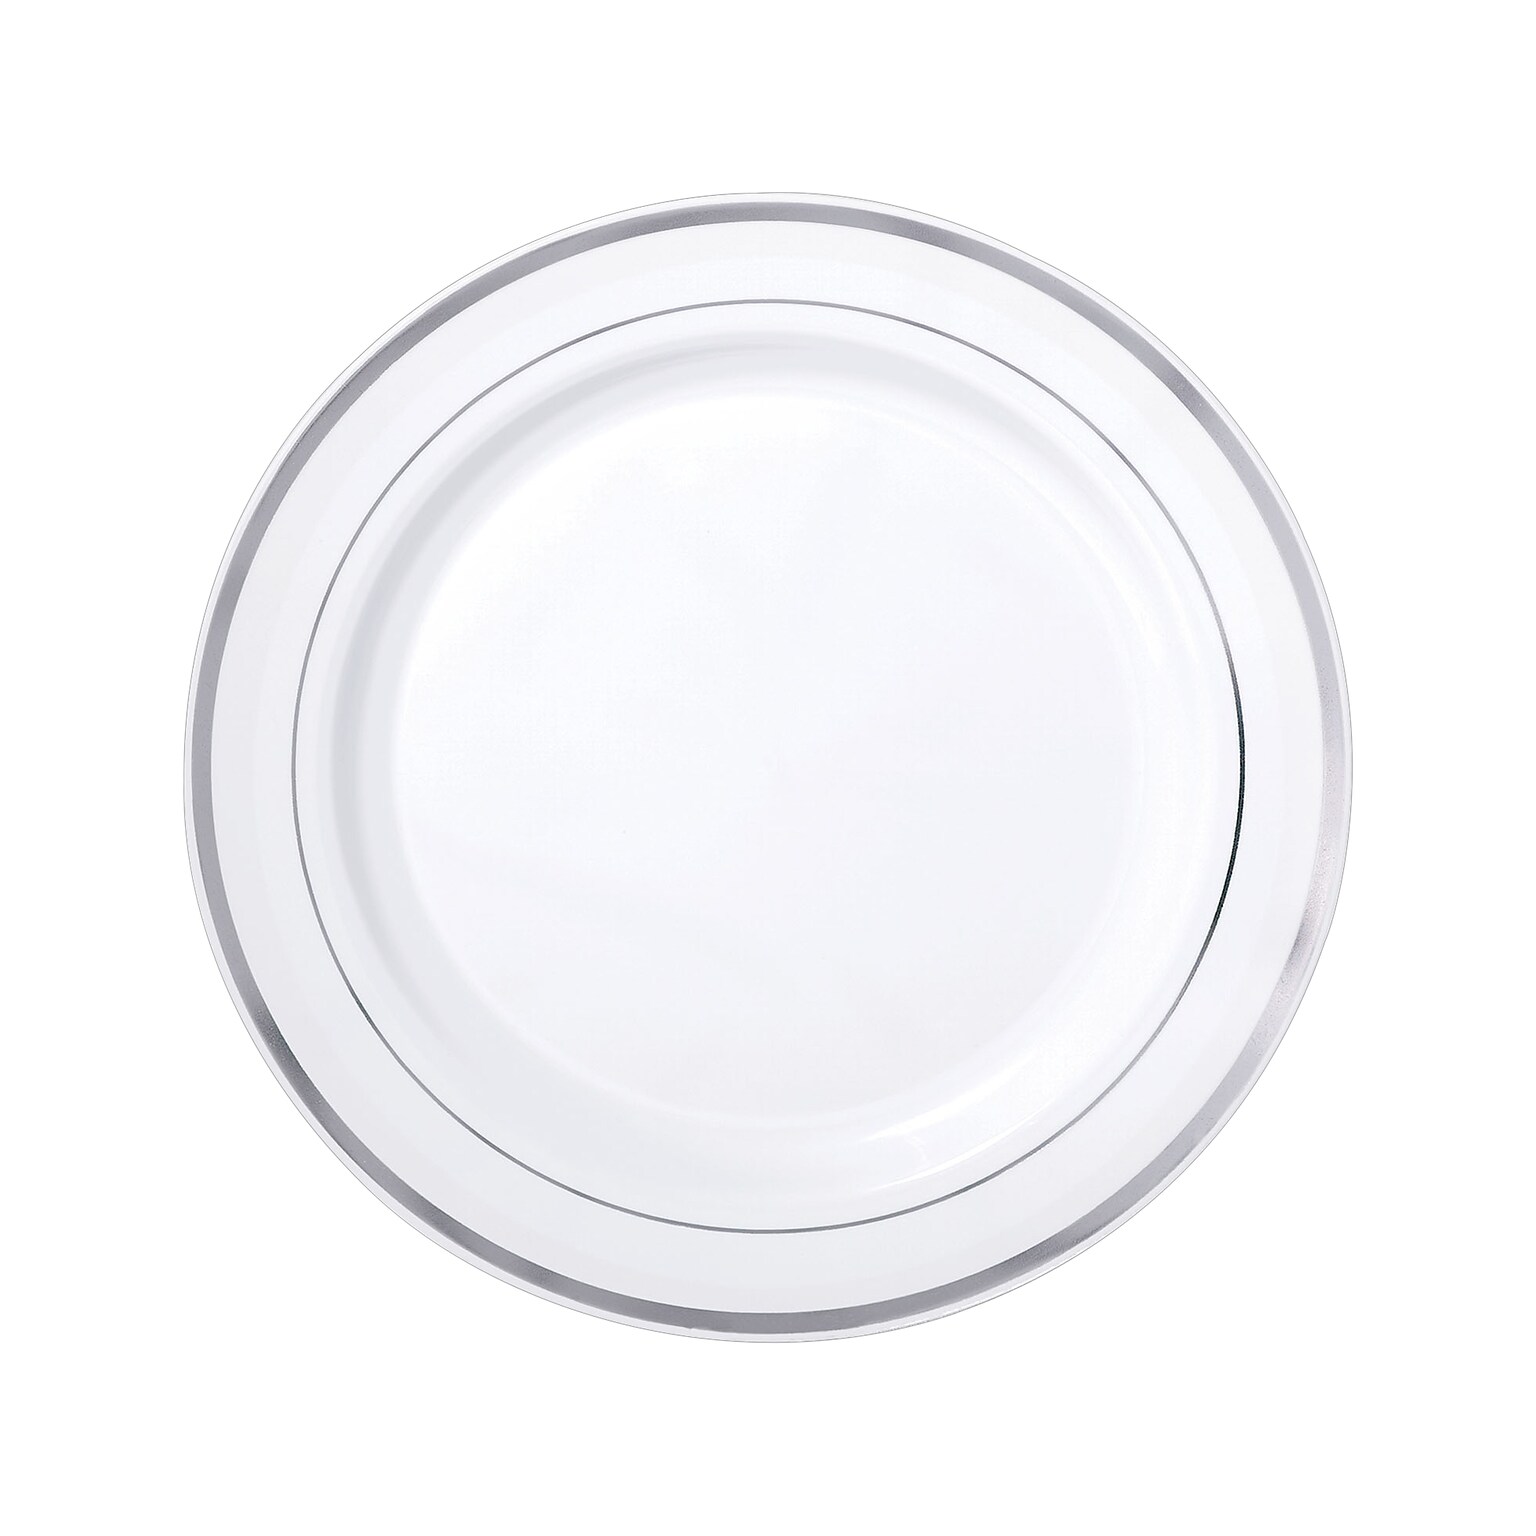 Amscan Premium Party Plate, White/Silver 20/Pack (438951)